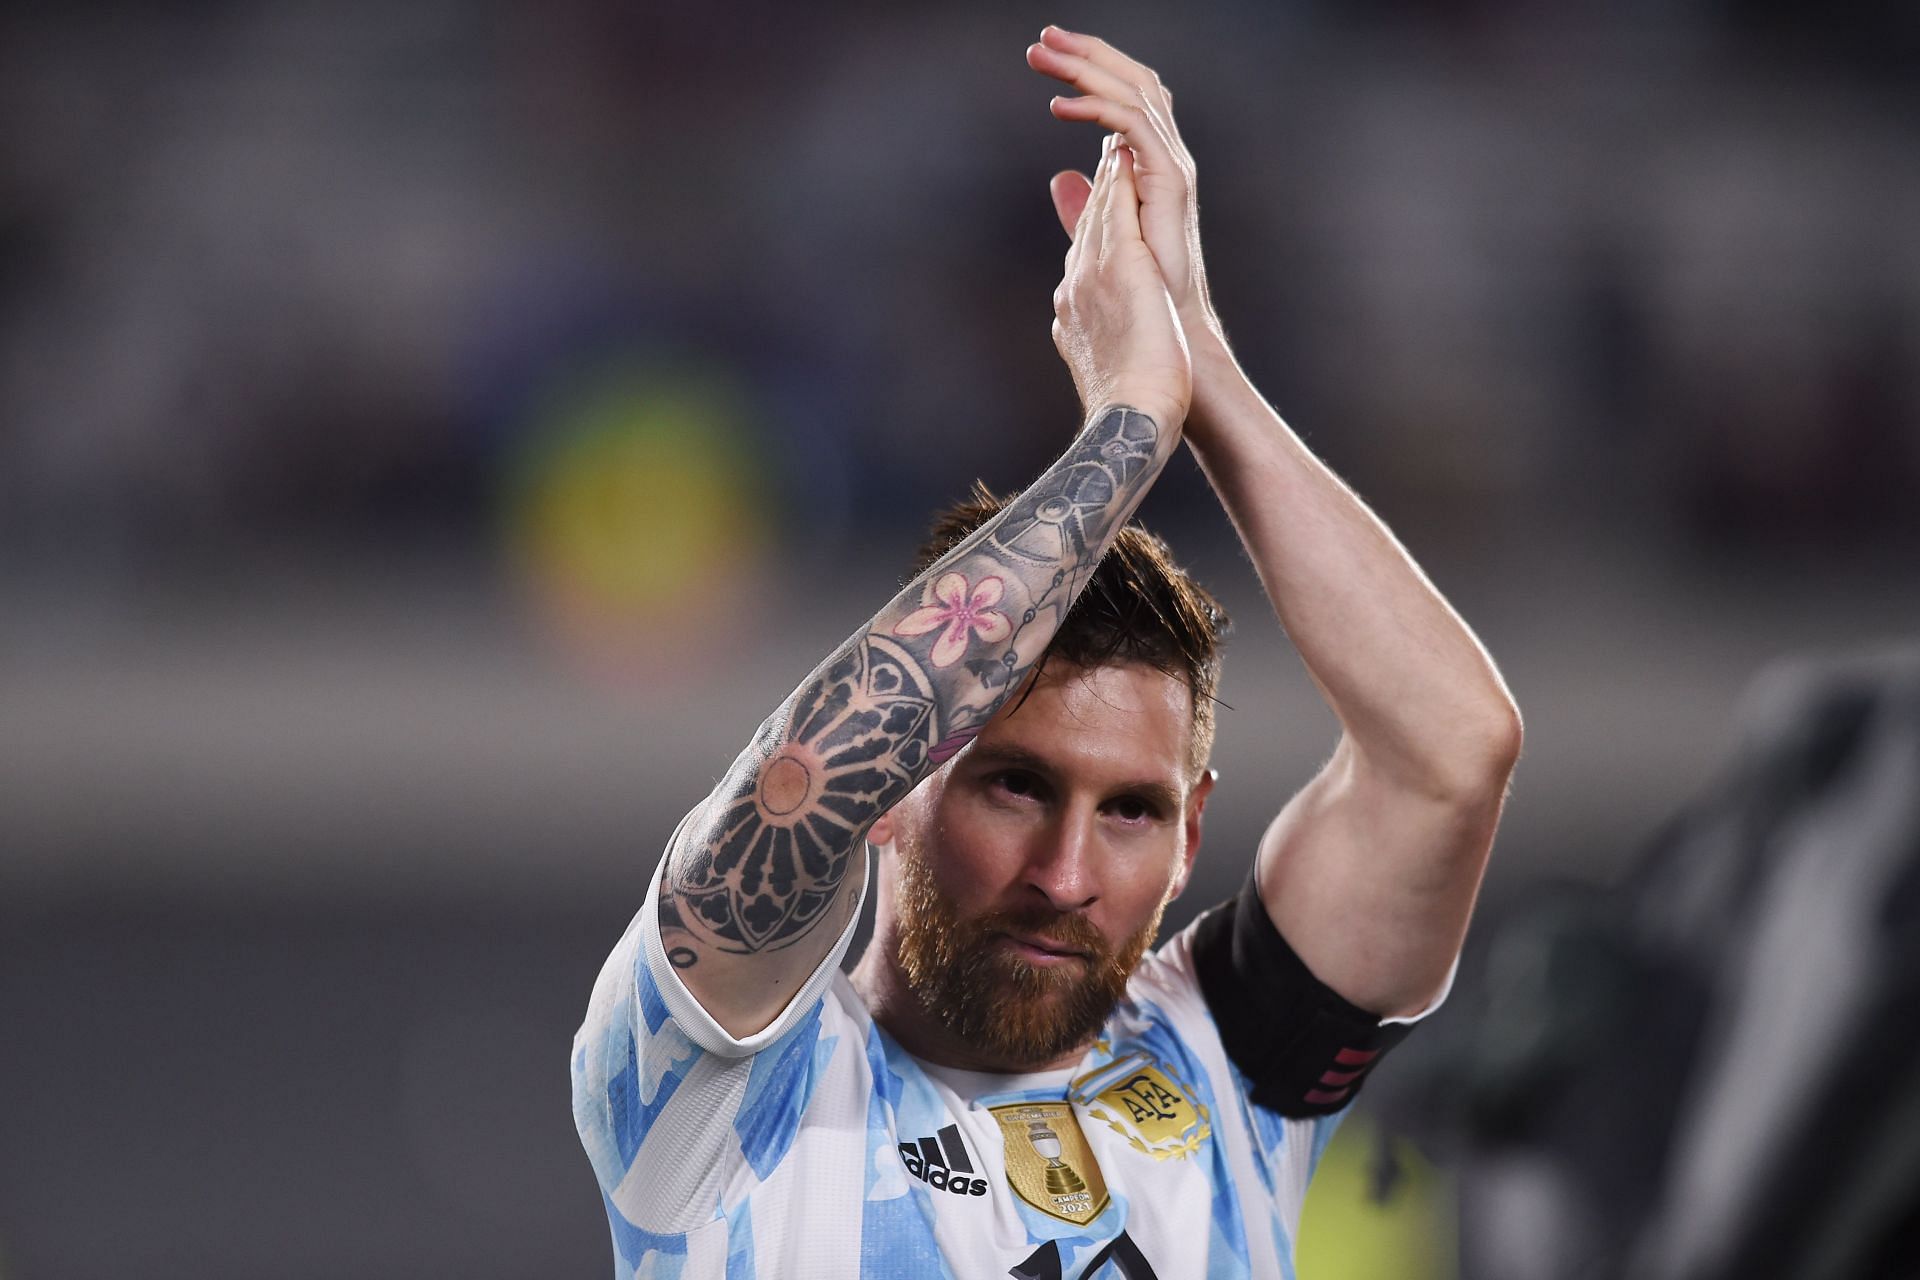 Lionel Messi has scored a lot of goals in FIFA World Cup qualifiers.